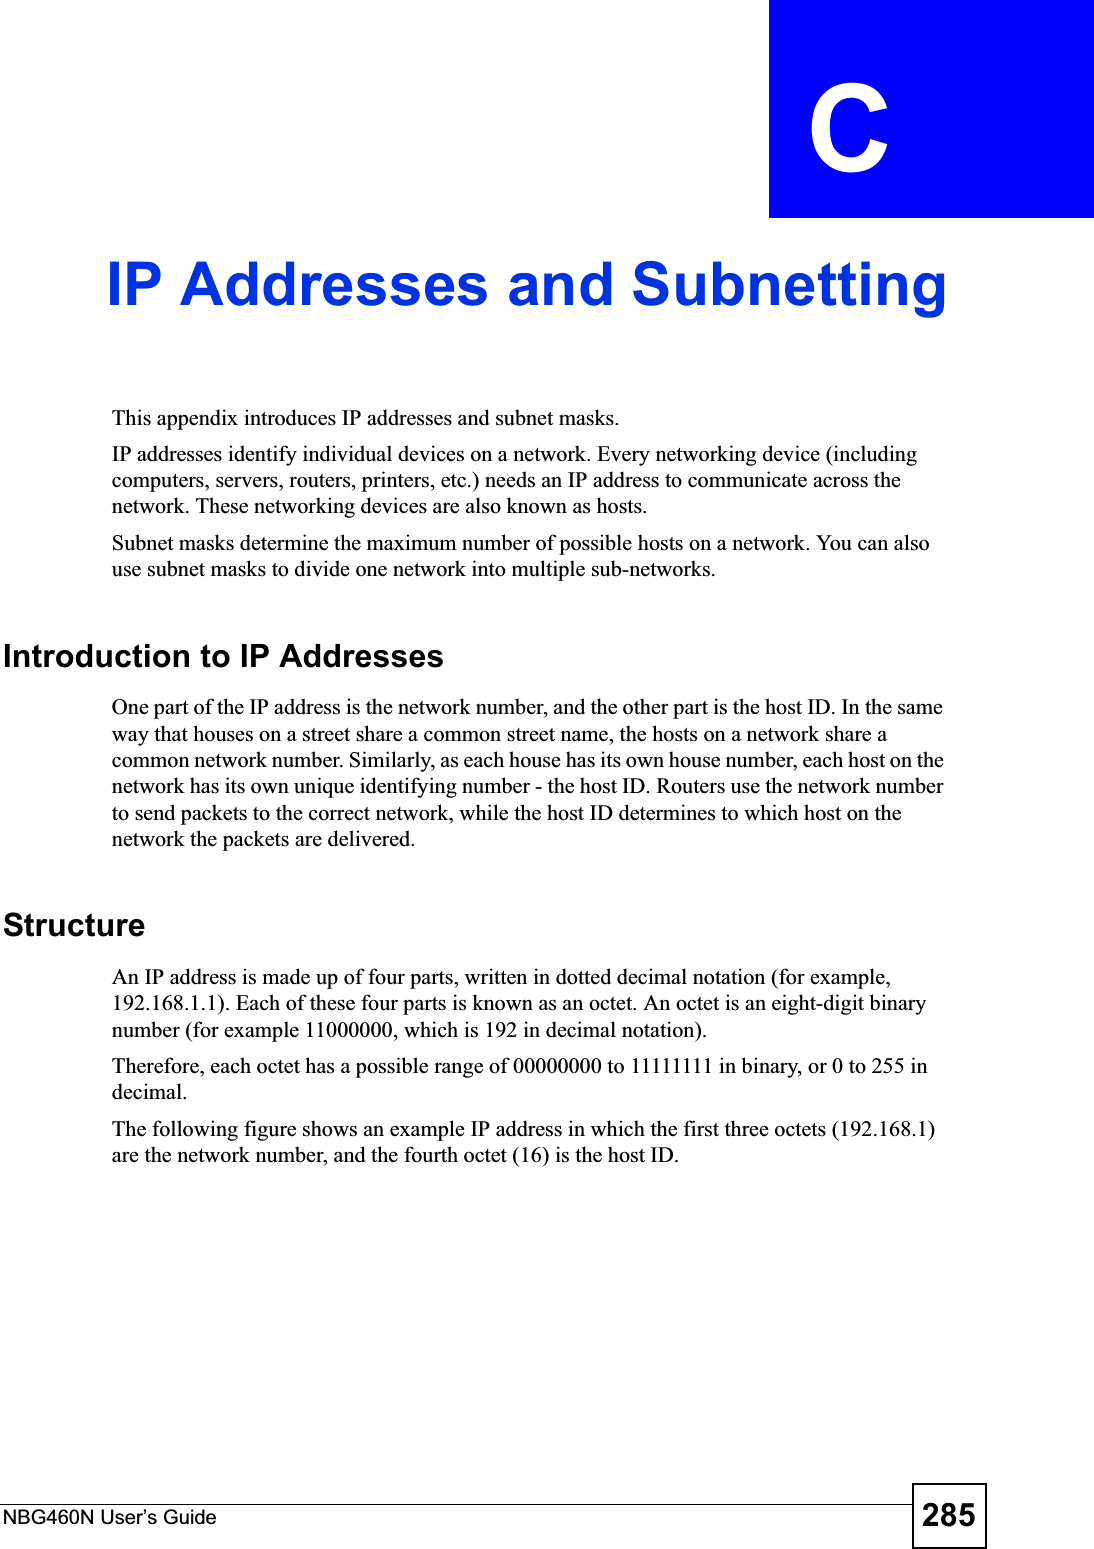 NBG460N User’s Guide 285APPENDIX  C IP Addresses and SubnettingThis appendix introduces IP addresses and subnet masks. IP addresses identify individual devices on a network. Every networking device (including computers, servers, routers, printers, etc.) needs an IP address to communicate across the network. These networking devices are also known as hosts.Subnet masks determine the maximum number of possible hosts on a network. You can also use subnet masks to divide one network into multiple sub-networks.Introduction to IP AddressesOne part of the IP address is the network number, and the other part is the host ID. In the same way that houses on a street share a common street name, the hosts on a network share a common network number. Similarly, as each house has its own house number, each host on the network has its own unique identifying number - the host ID. Routers use the network number to send packets to the correct network, while the host ID determines to which host on the network the packets are delivered.StructureAn IP address is made up of four parts, written in dotted decimal notation (for example, 192.168.1.1). Each of these four parts is known as an octet. An octet is an eight-digit binary number (for example 11000000, which is 192 in decimal notation). Therefore, each octet has a possible range of 00000000 to 11111111 in binary, or 0 to 255 in decimal.The following figure shows an example IP address in which the first three octets (192.168.1) are the network number, and the fourth octet (16) is the host ID.